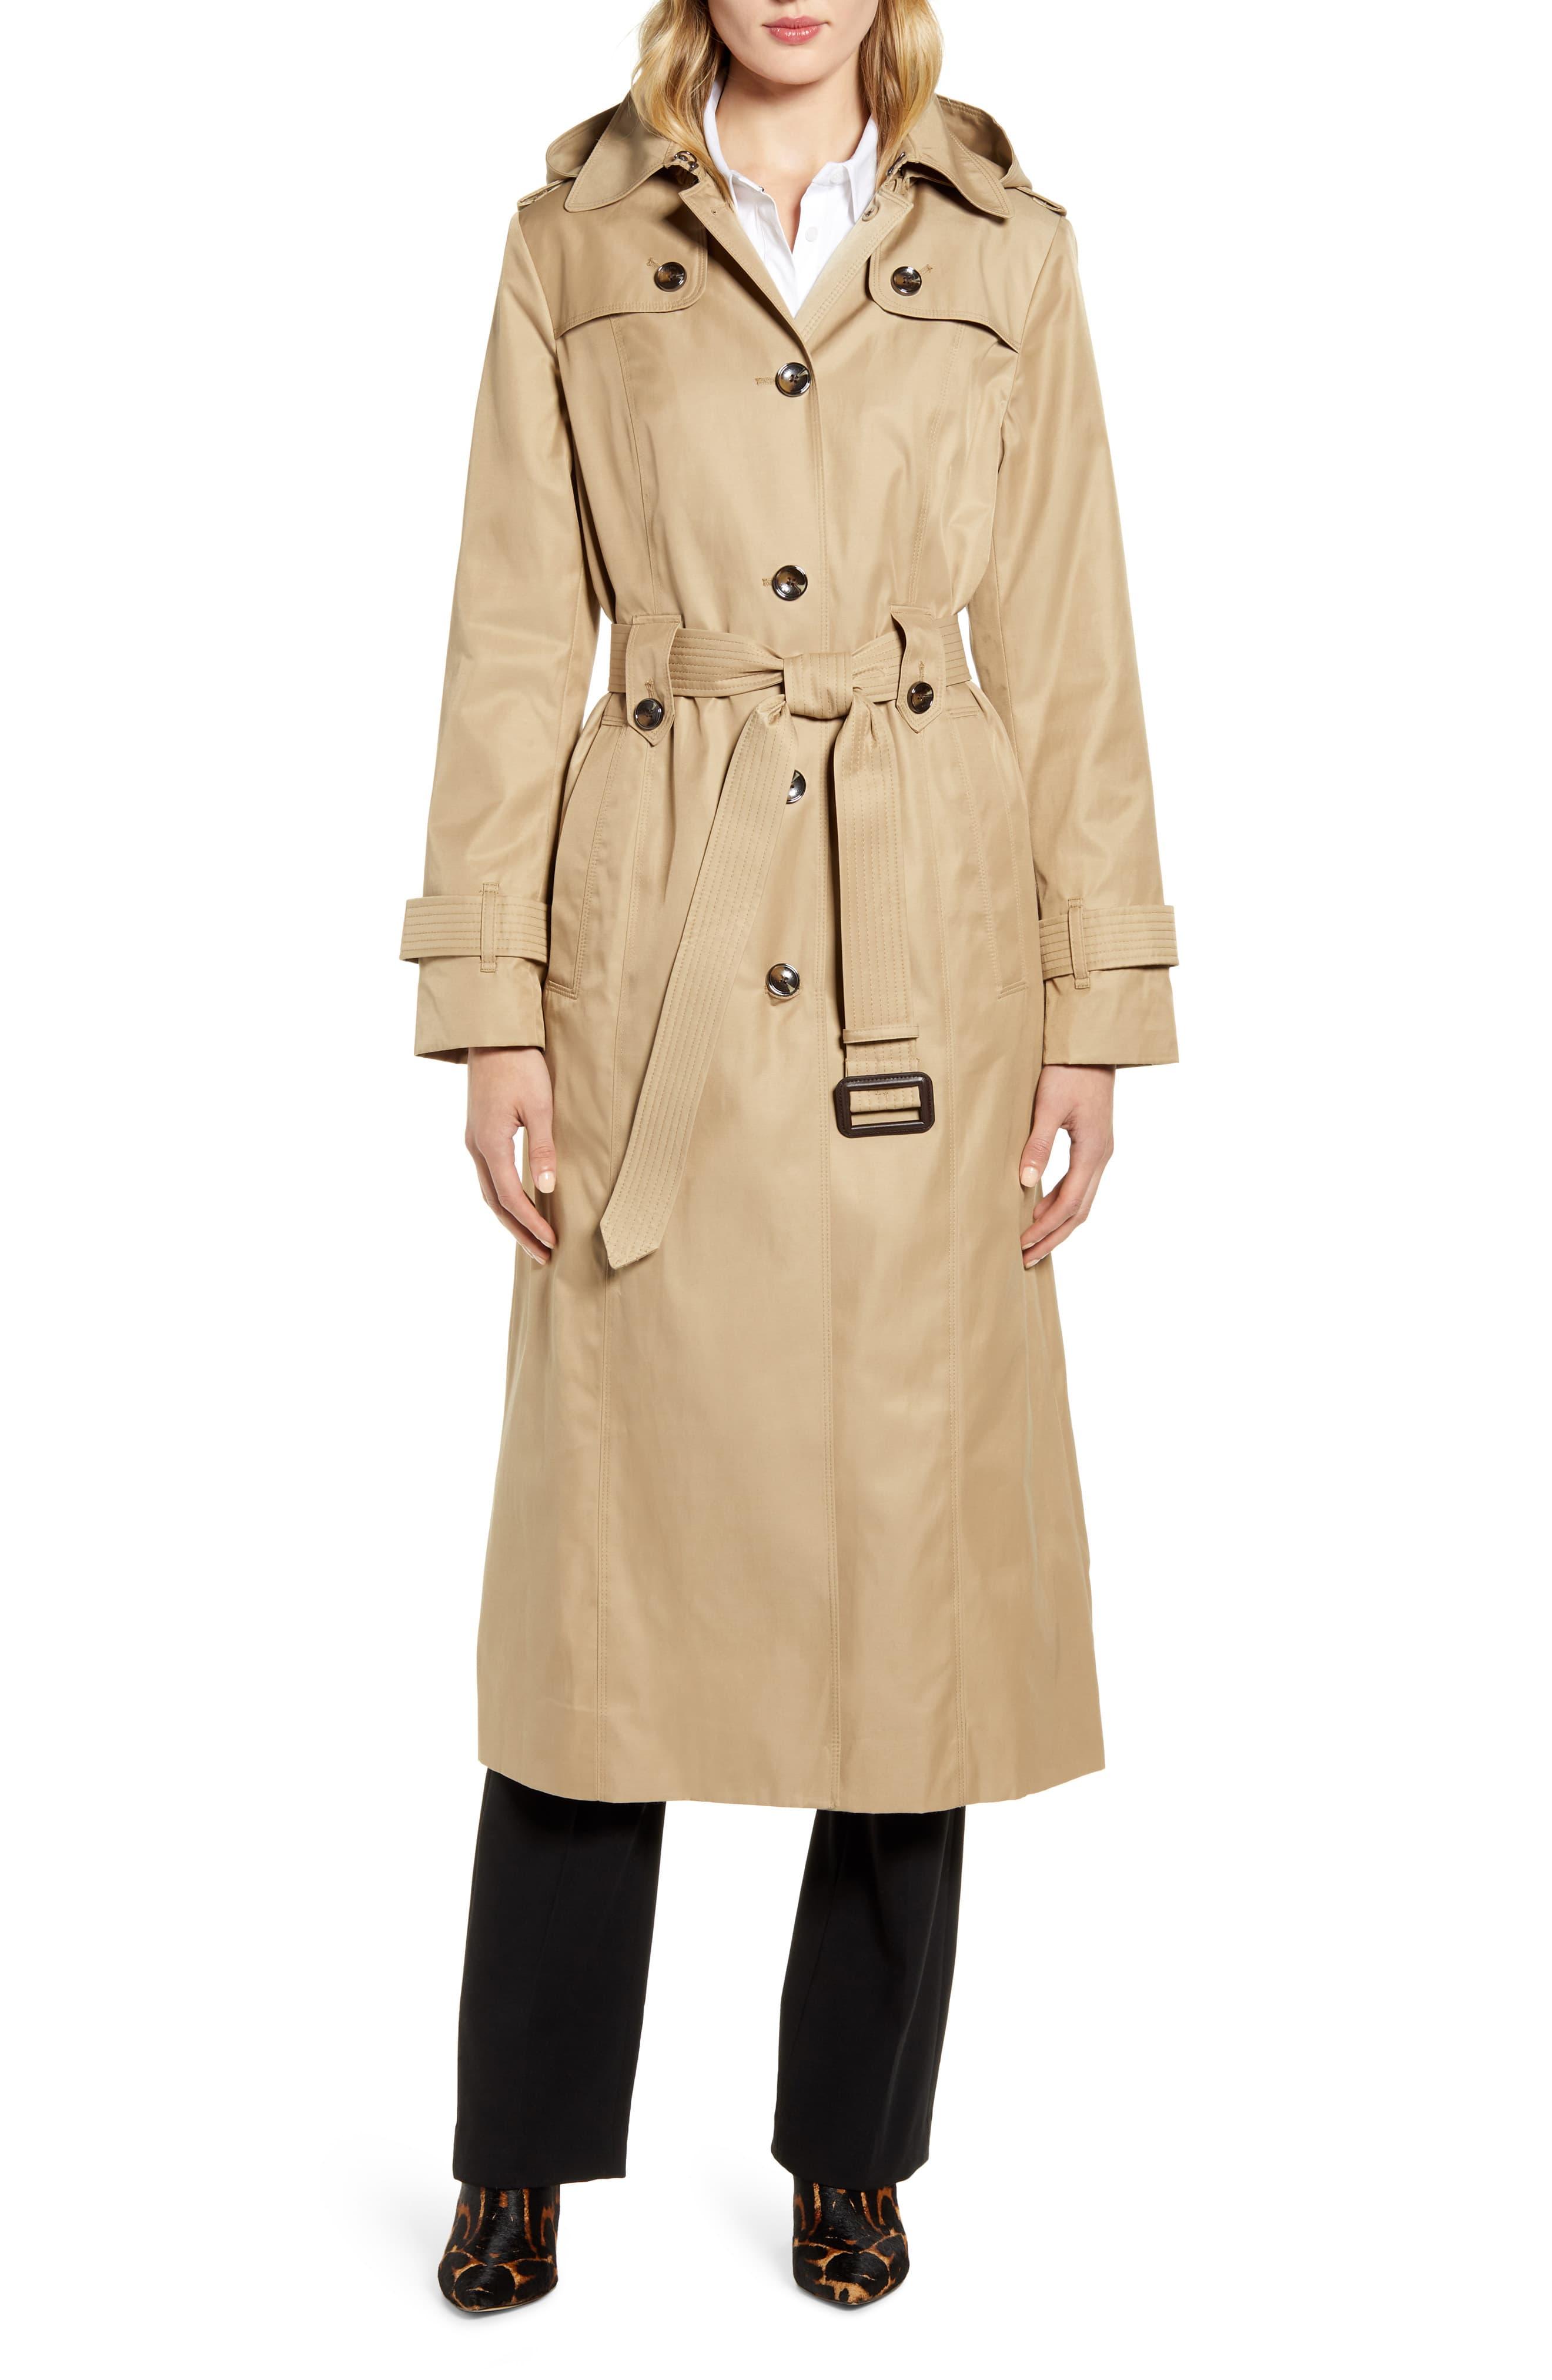 London Fog Long Hooded Trench Coat in br Khaki (Natural) - Save 52% - Lyst